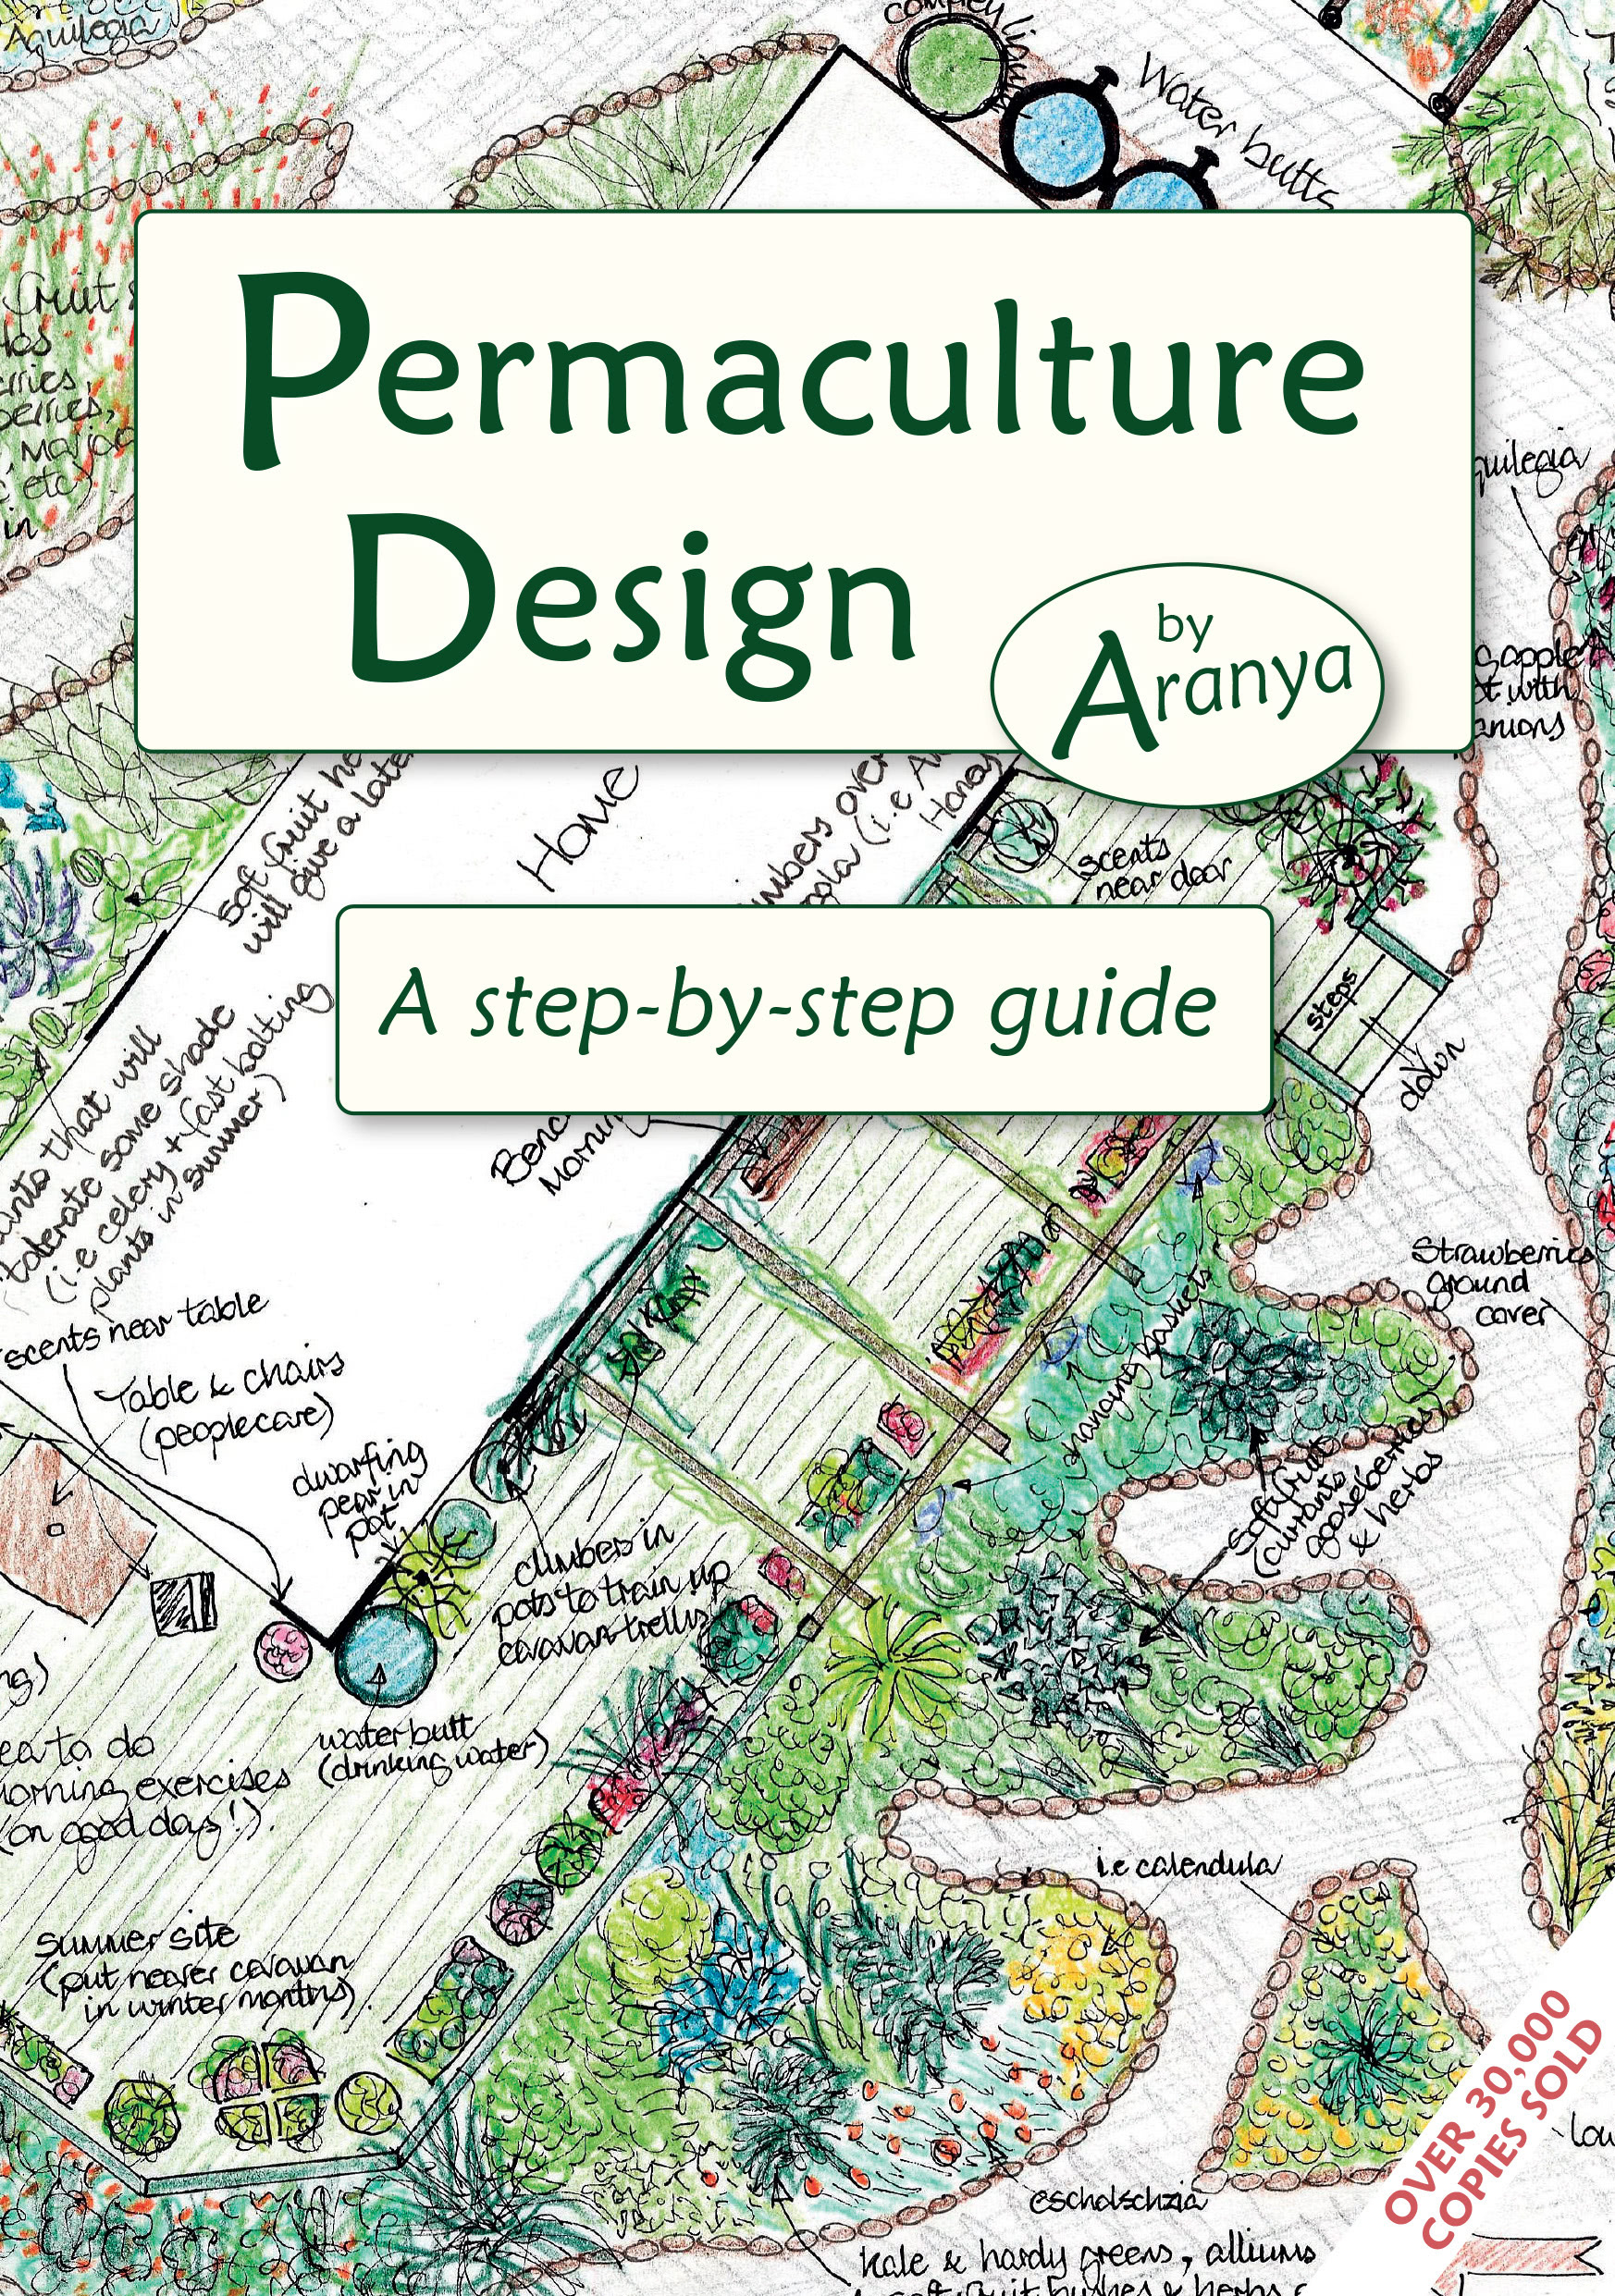 Permaculture Design: A step-by-step guide